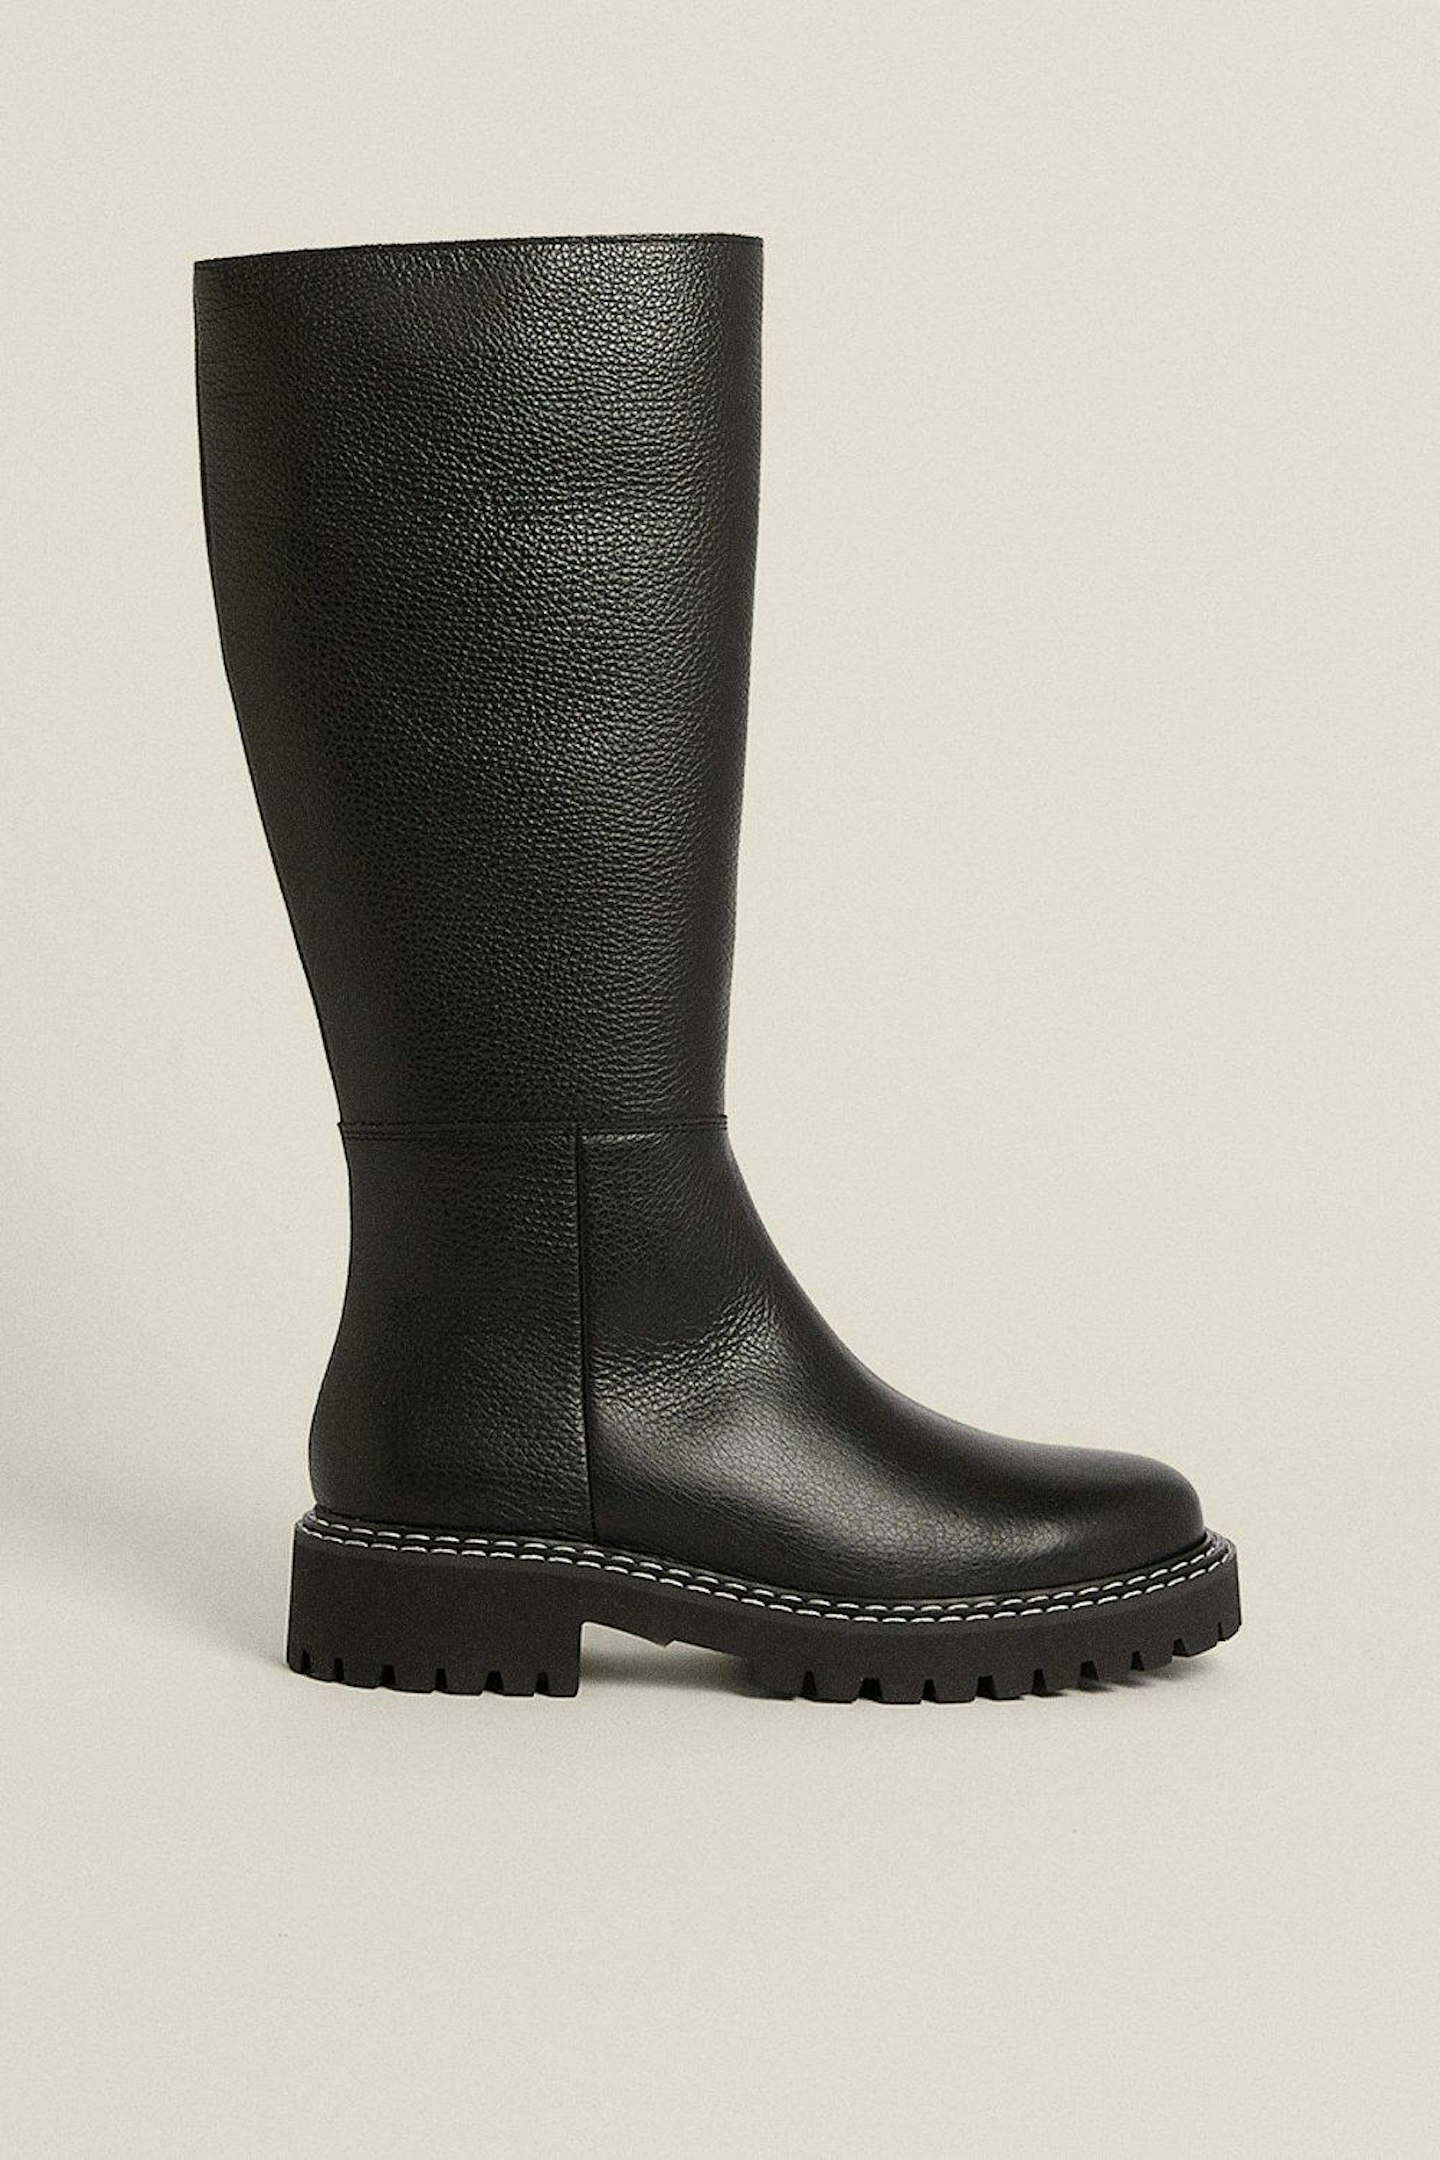 Oasis, Leather Double Stitch High Leg Boot, £149